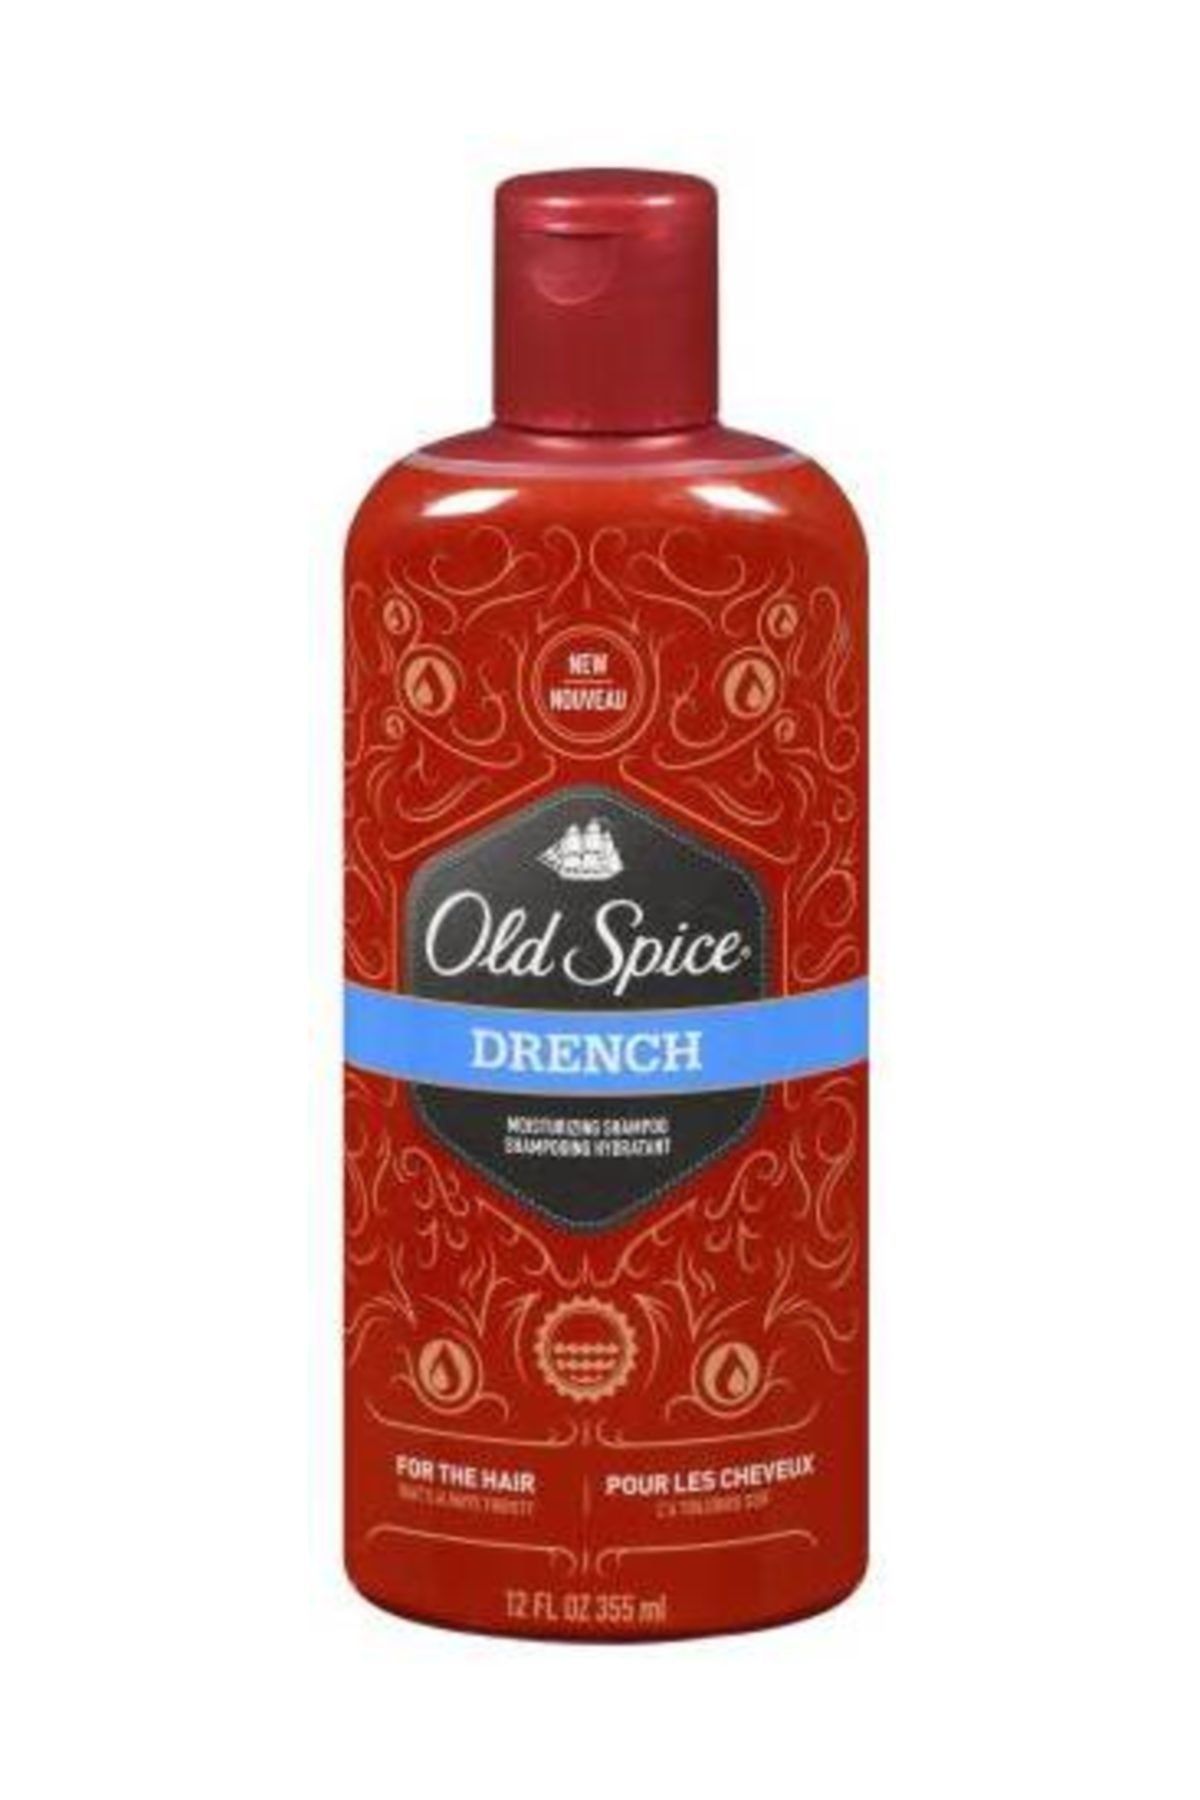 Old Spice Drench Şampuan 355ml